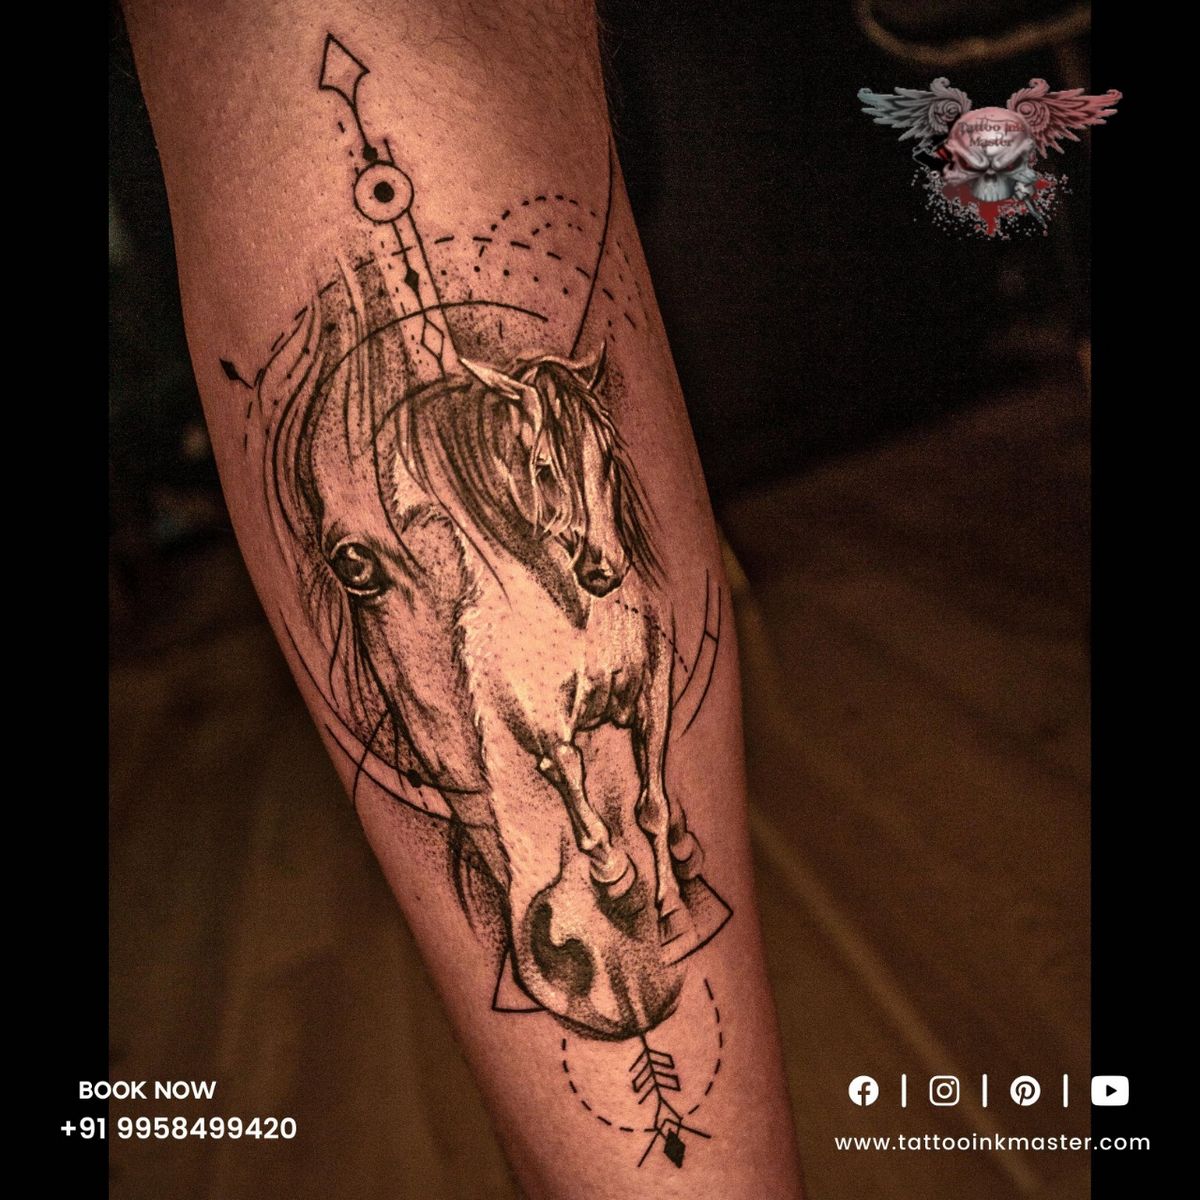 You are currently viewing Carved Horse Tattoo by Tattooinkmaster